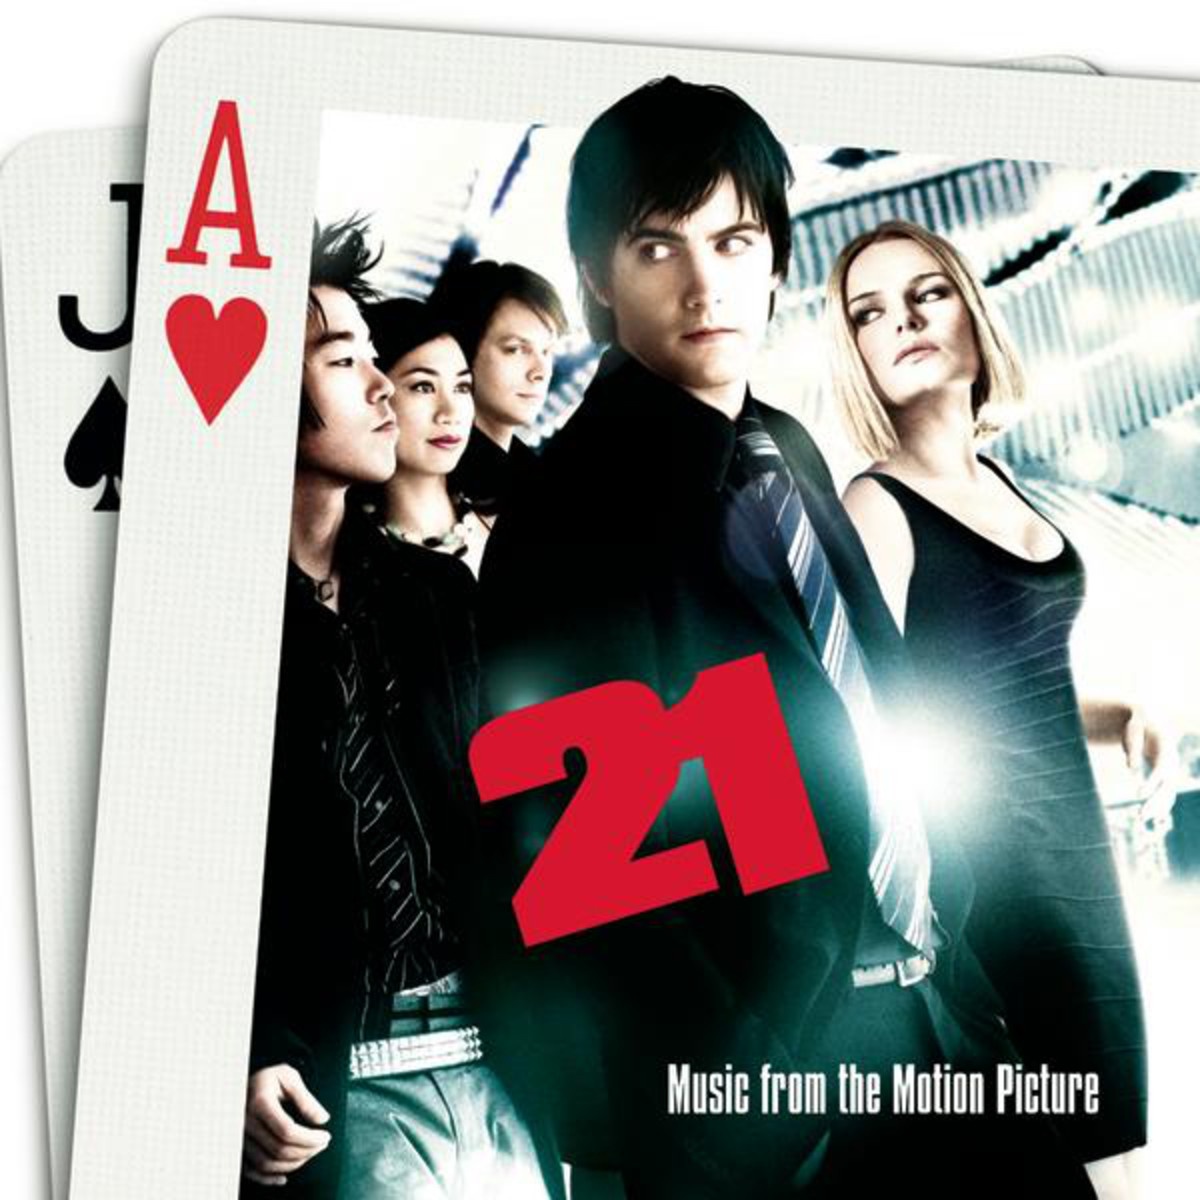 21 (Music from the Motion Picture)